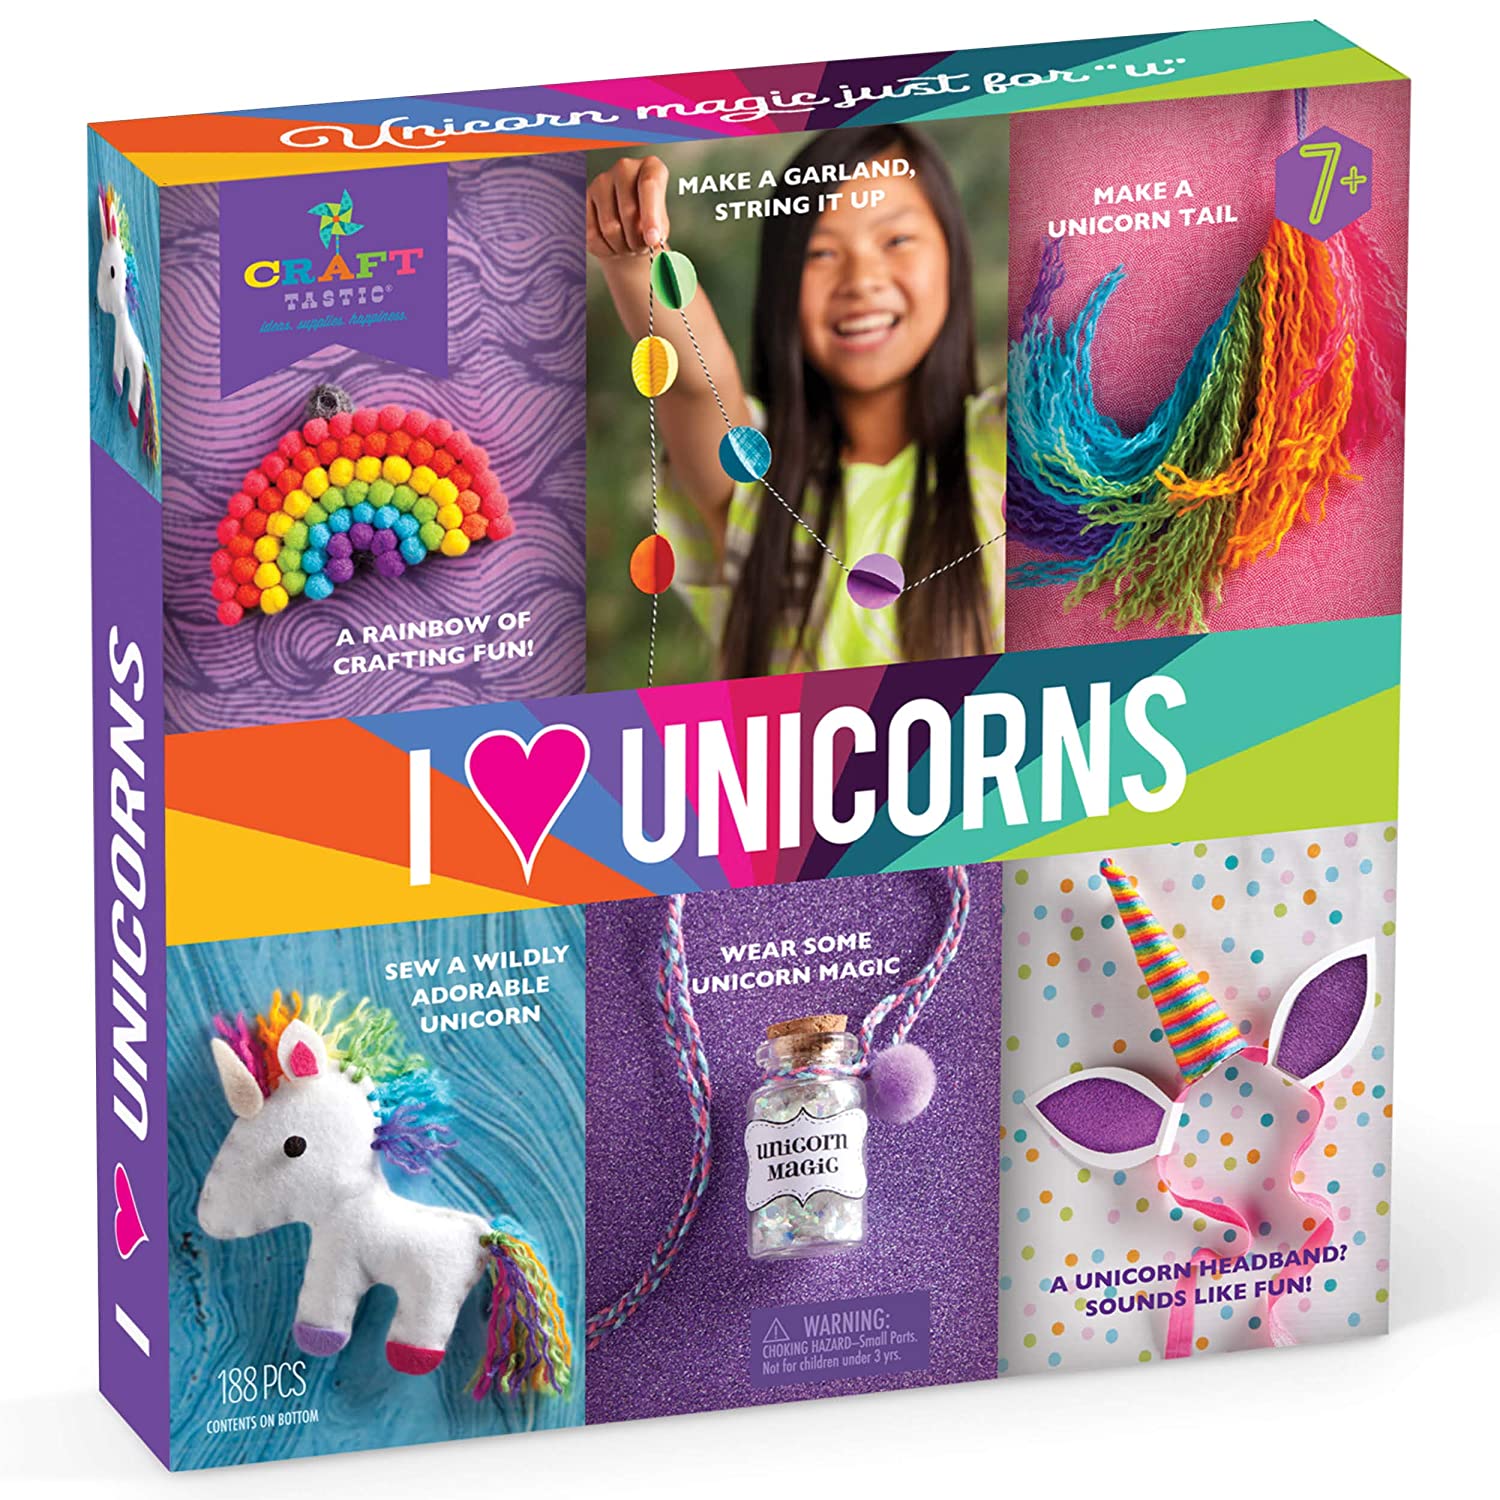 23 Best Unicorn Toys and Gifts for Girls 2022 - Review & Buying Guide 2